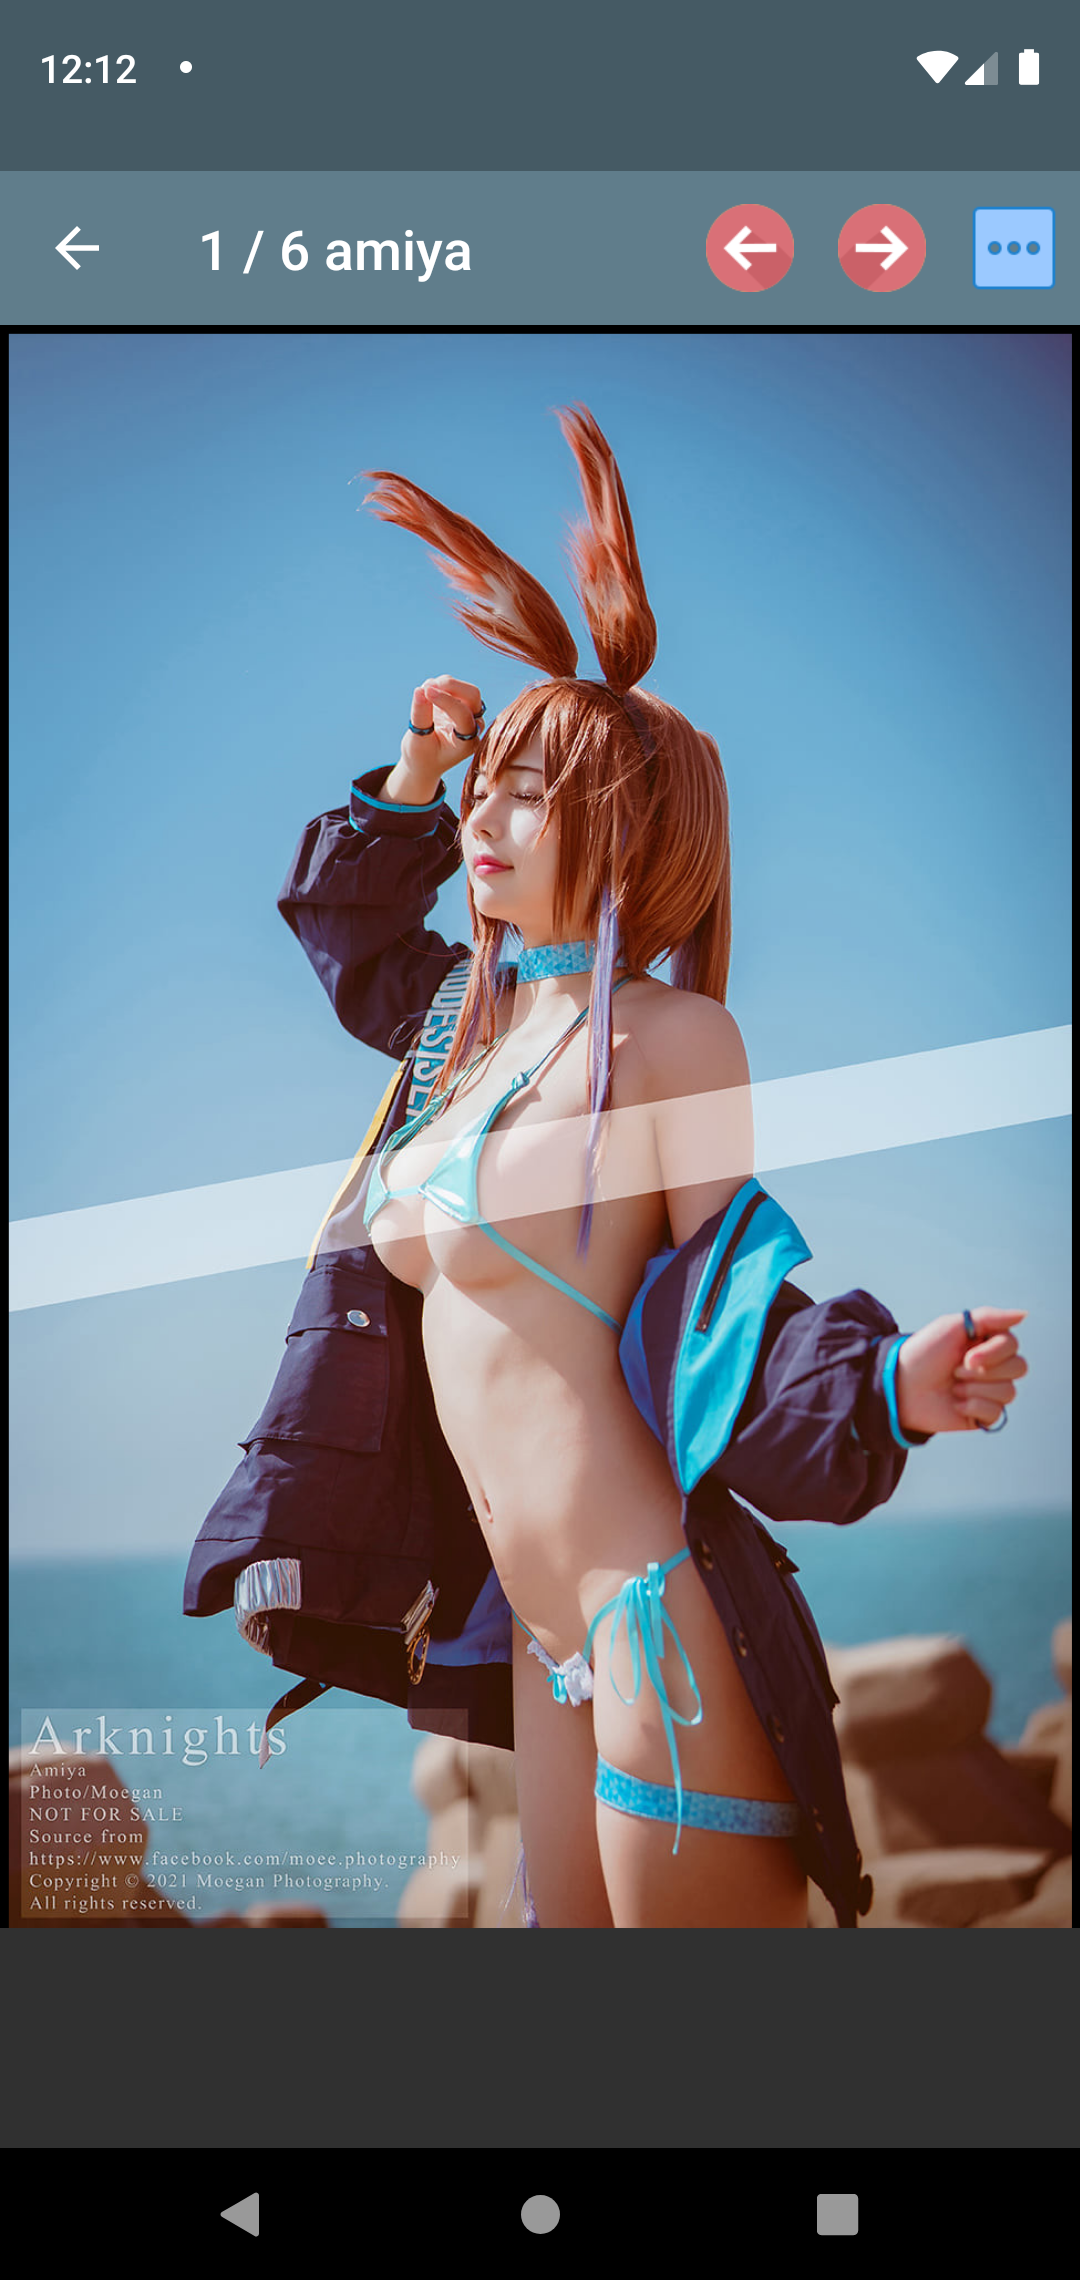 Okita Rinka Pictues gag,apk,apps,collection,sexy,pics,star,download,photo,gallery,hentai,softcore,henatai,photos,porn,comics,android,pictures,cosplay,app,erotic,asian,girl,henati